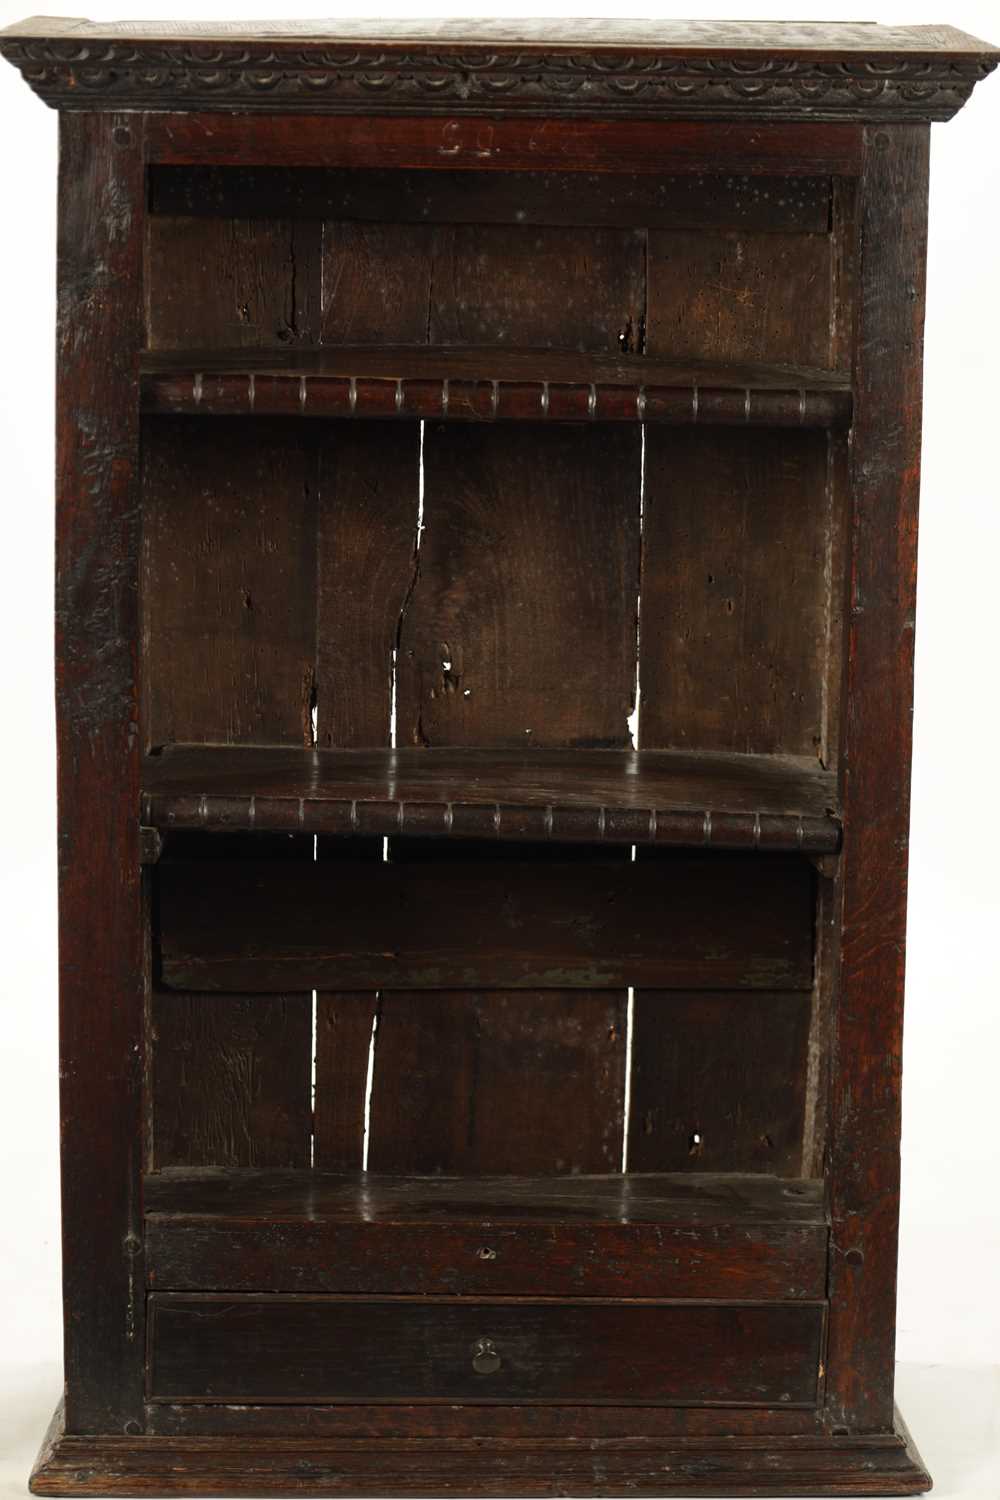 A 17TH CENTURY OAK HANGING OPEN SPICE RACK WITH FITTED DRAWER - Image 3 of 8